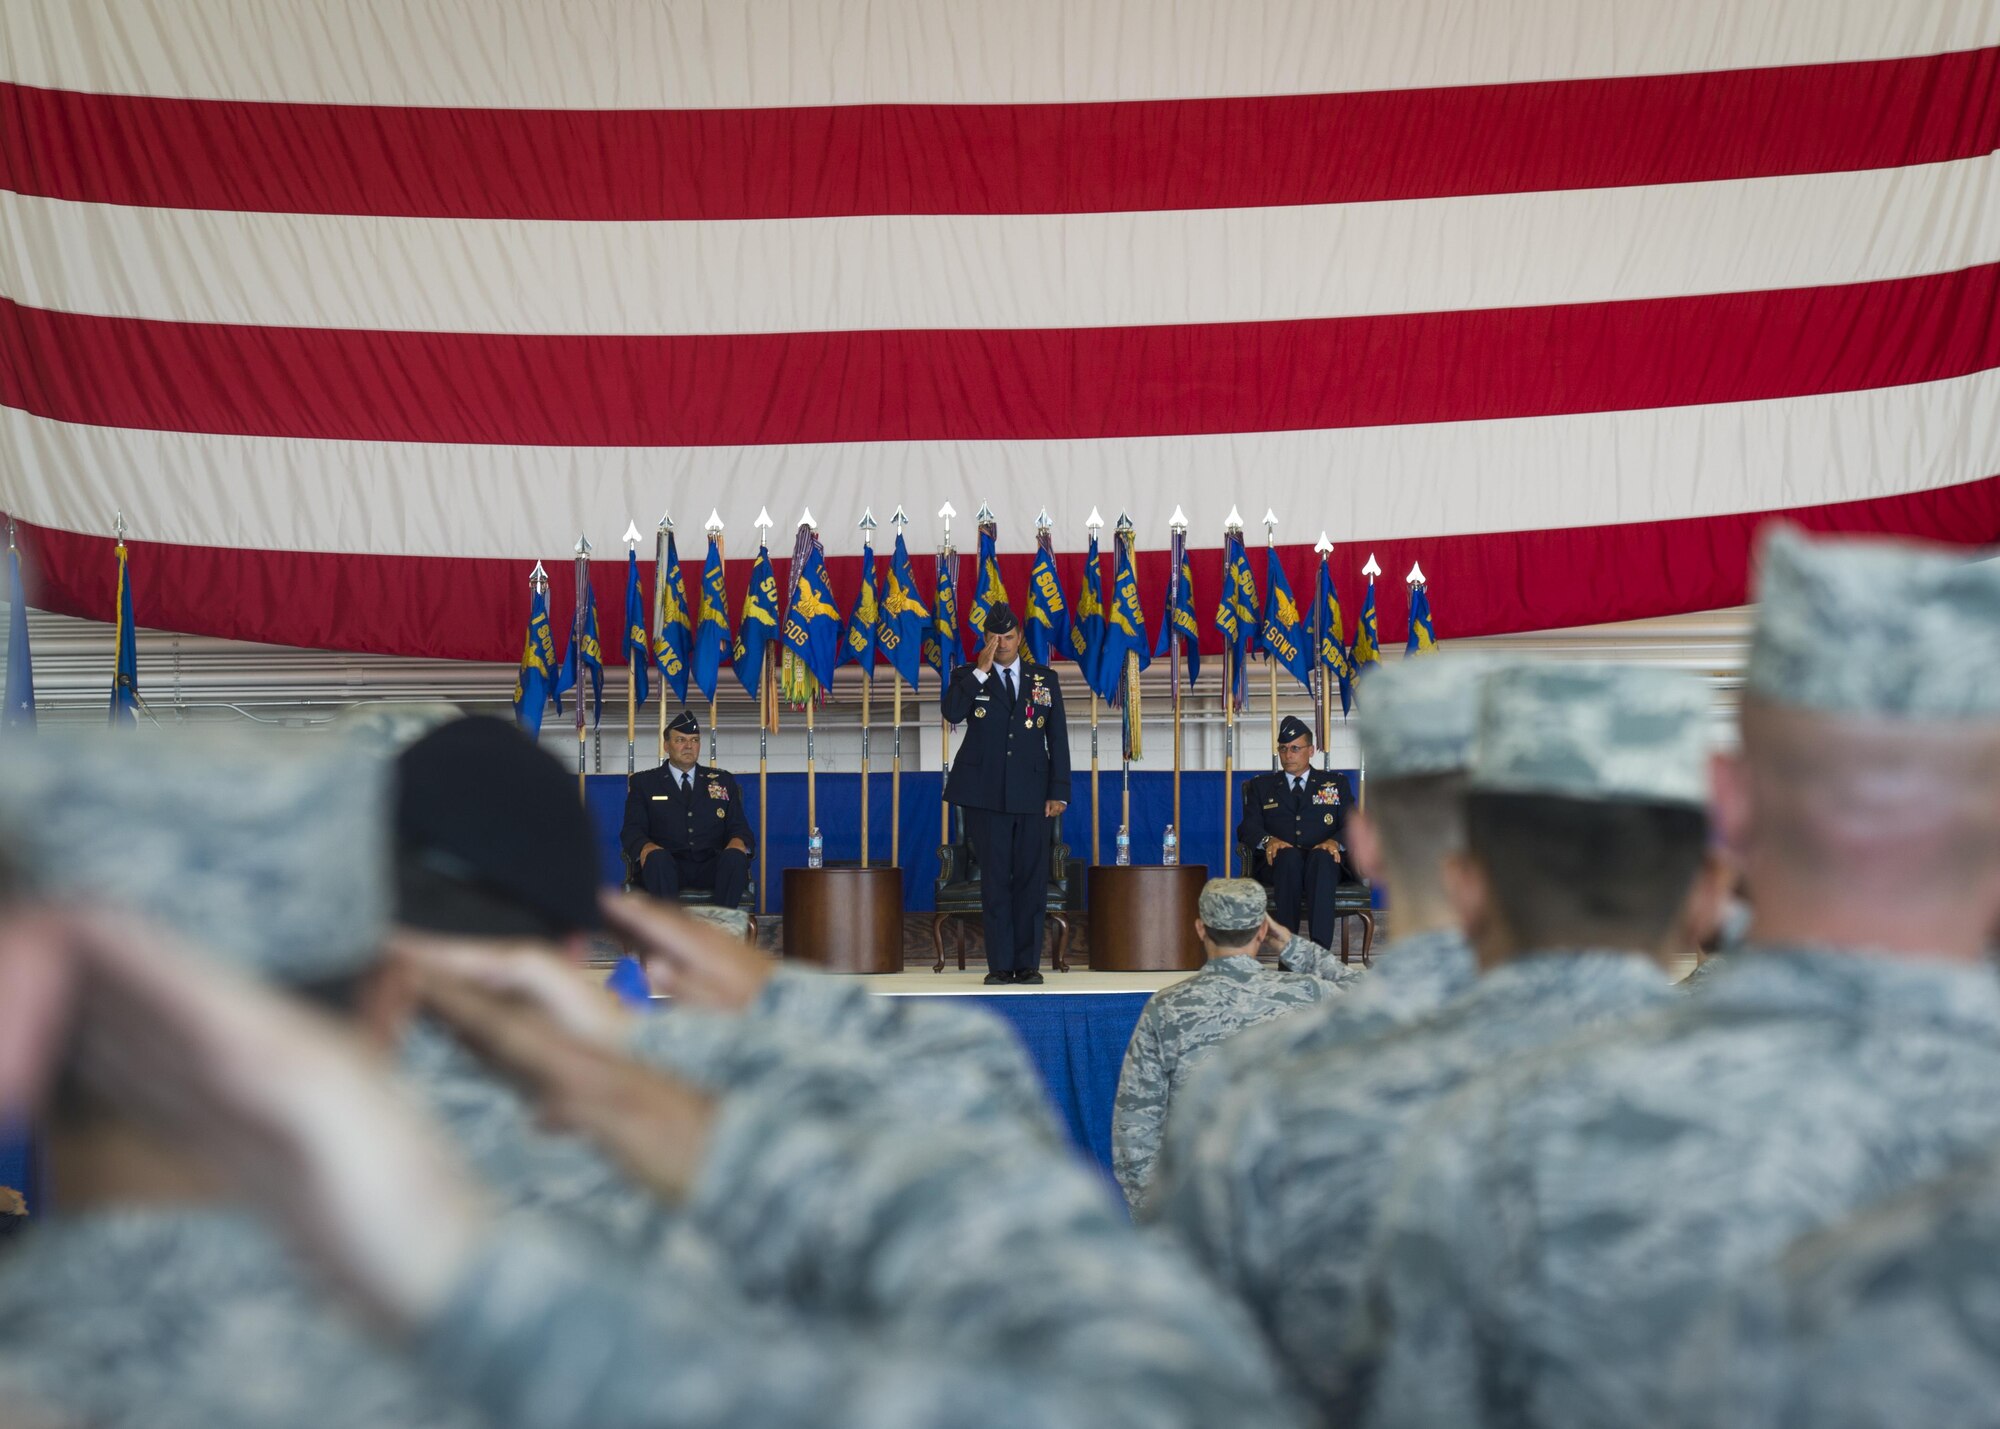 Col. Sean Farrell, former commander of the 1st Special Operations Wing, renders his final salute as commander during a change of command ceremony at Hurlburt Field, Fla., June 10, 2016. Farrell relinquished command to Col. Tom Palenske, the former vice commander of the 1st SOW, after commanding the wing for more than 18 months and employing more than 5,000 Air Commandos who executed 30,900 combat flight hours. (U.S. Air Force photo by Airman 1st Class Kai White)